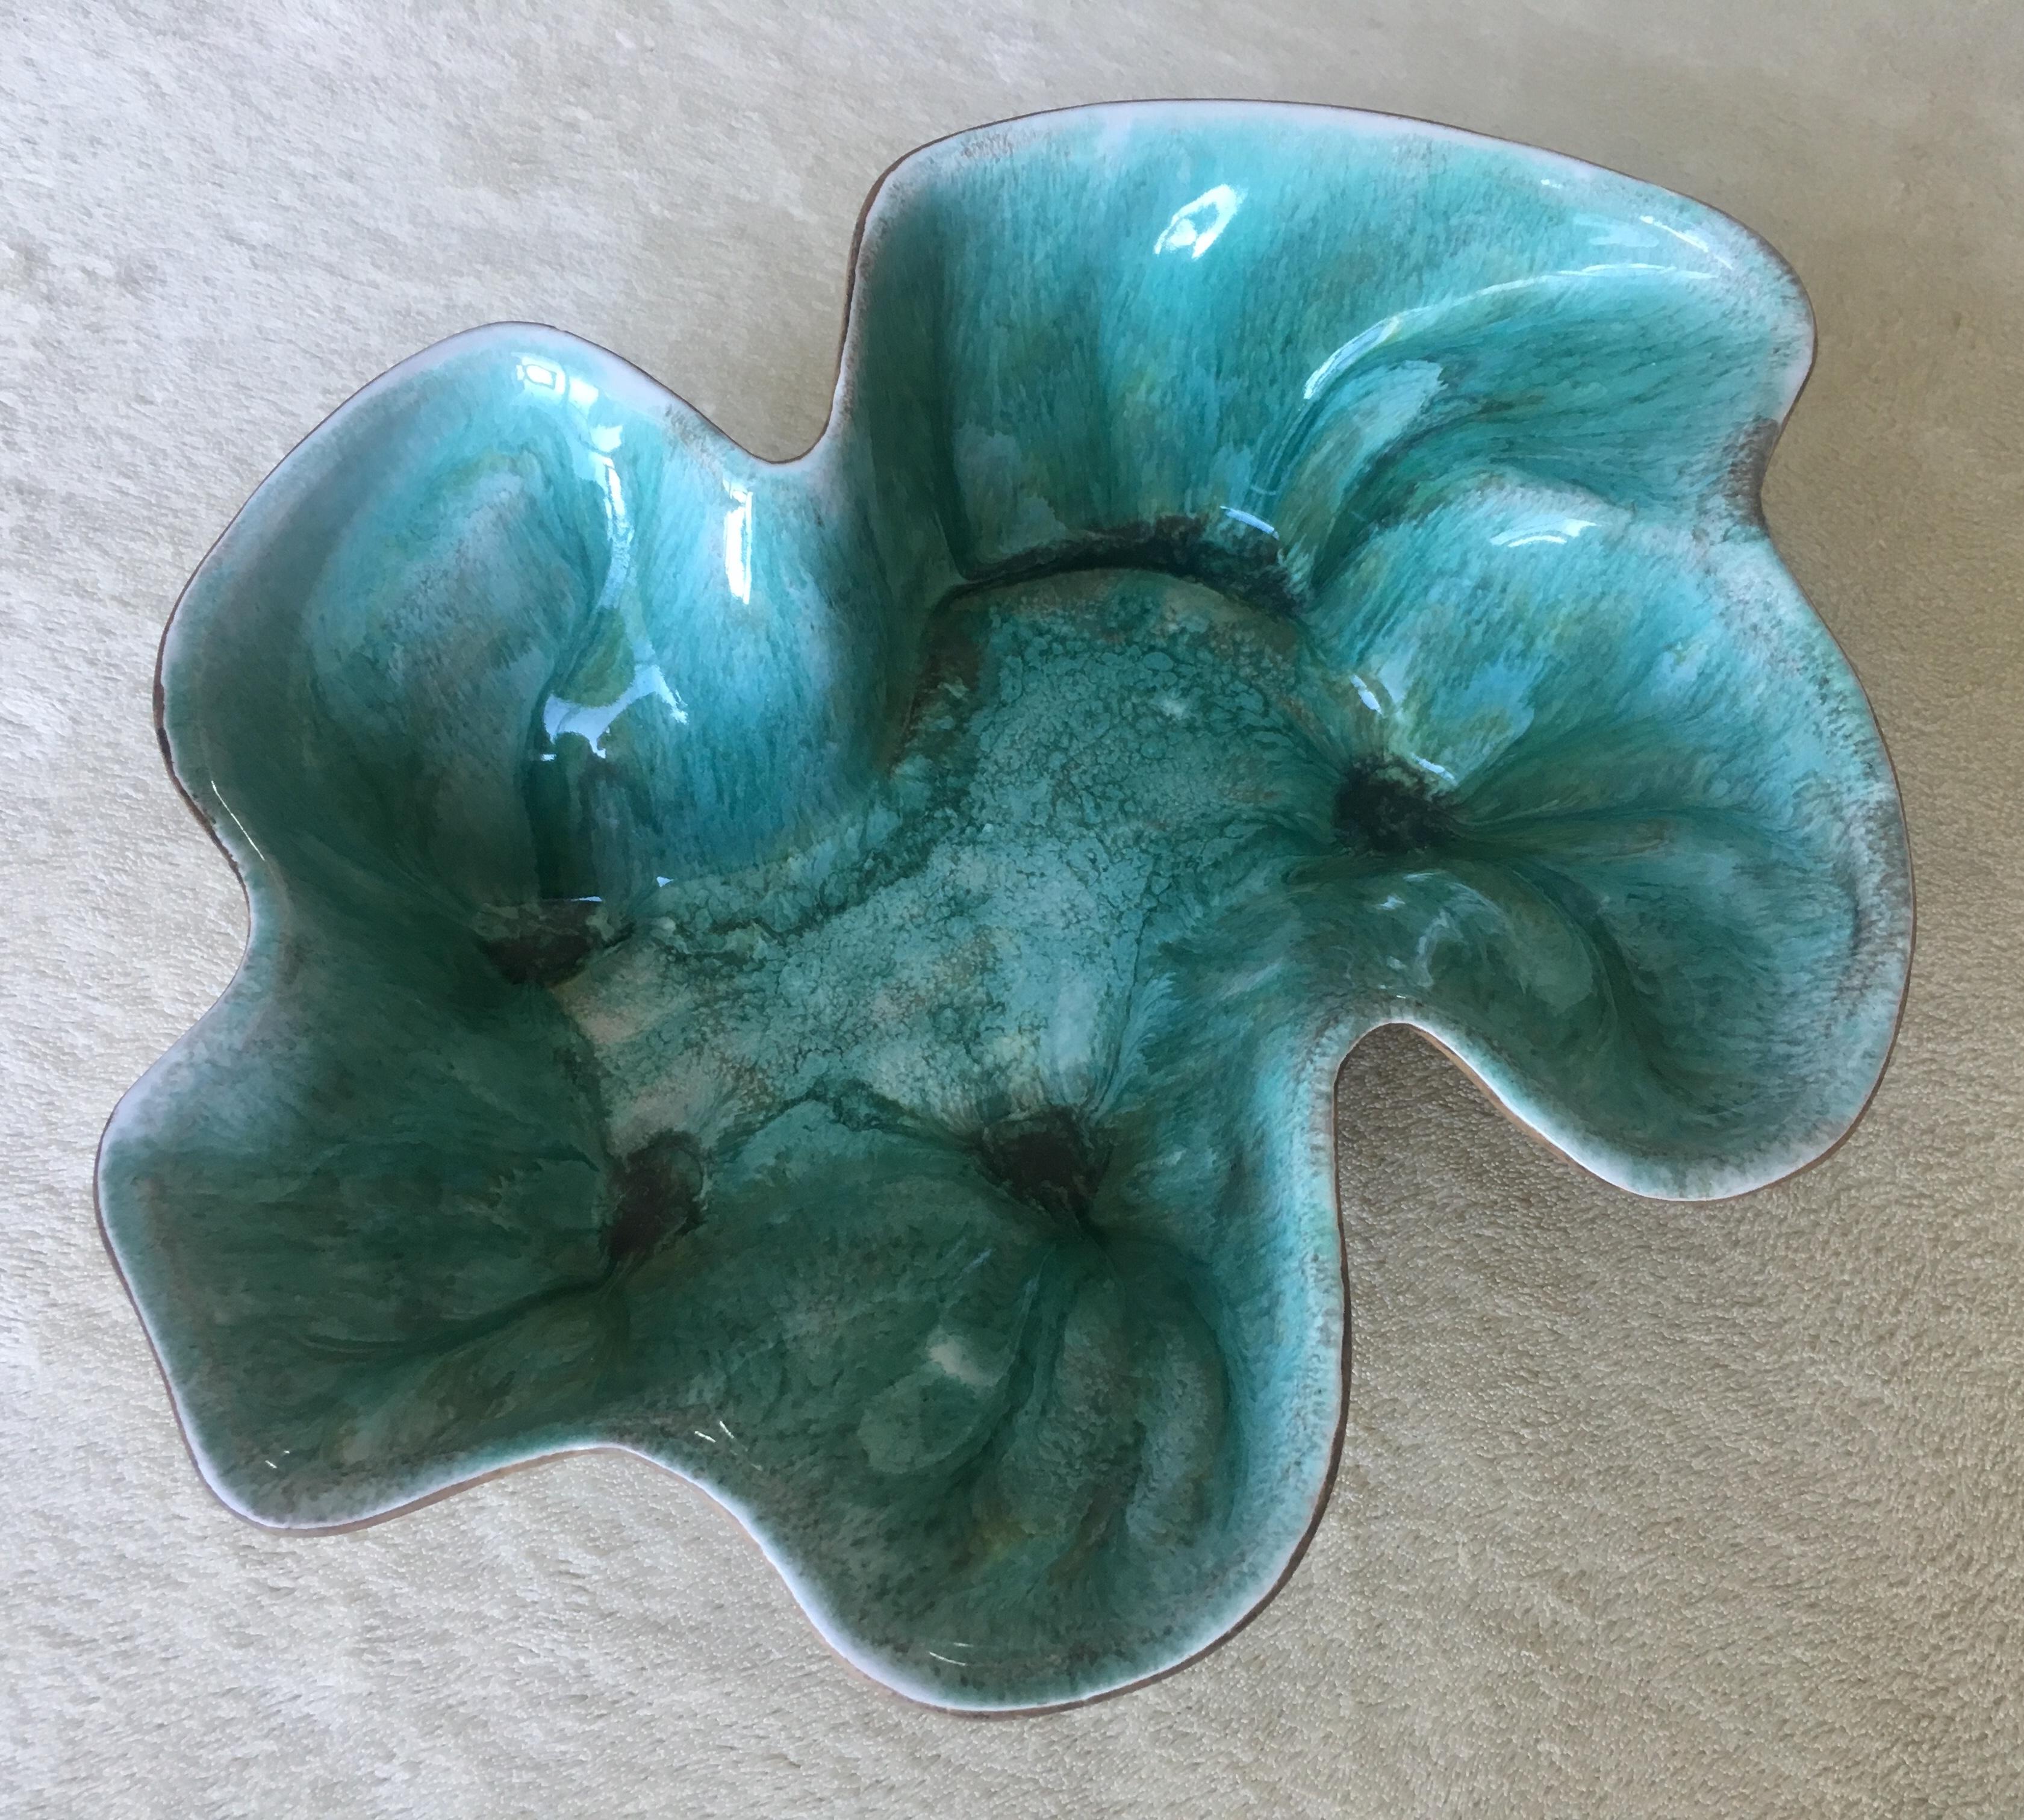 Mid-Century Modern Midcentury Sculpted Ceramic Bowl by Flora Eckert Hammat, Turquoise Art Pottery For Sale